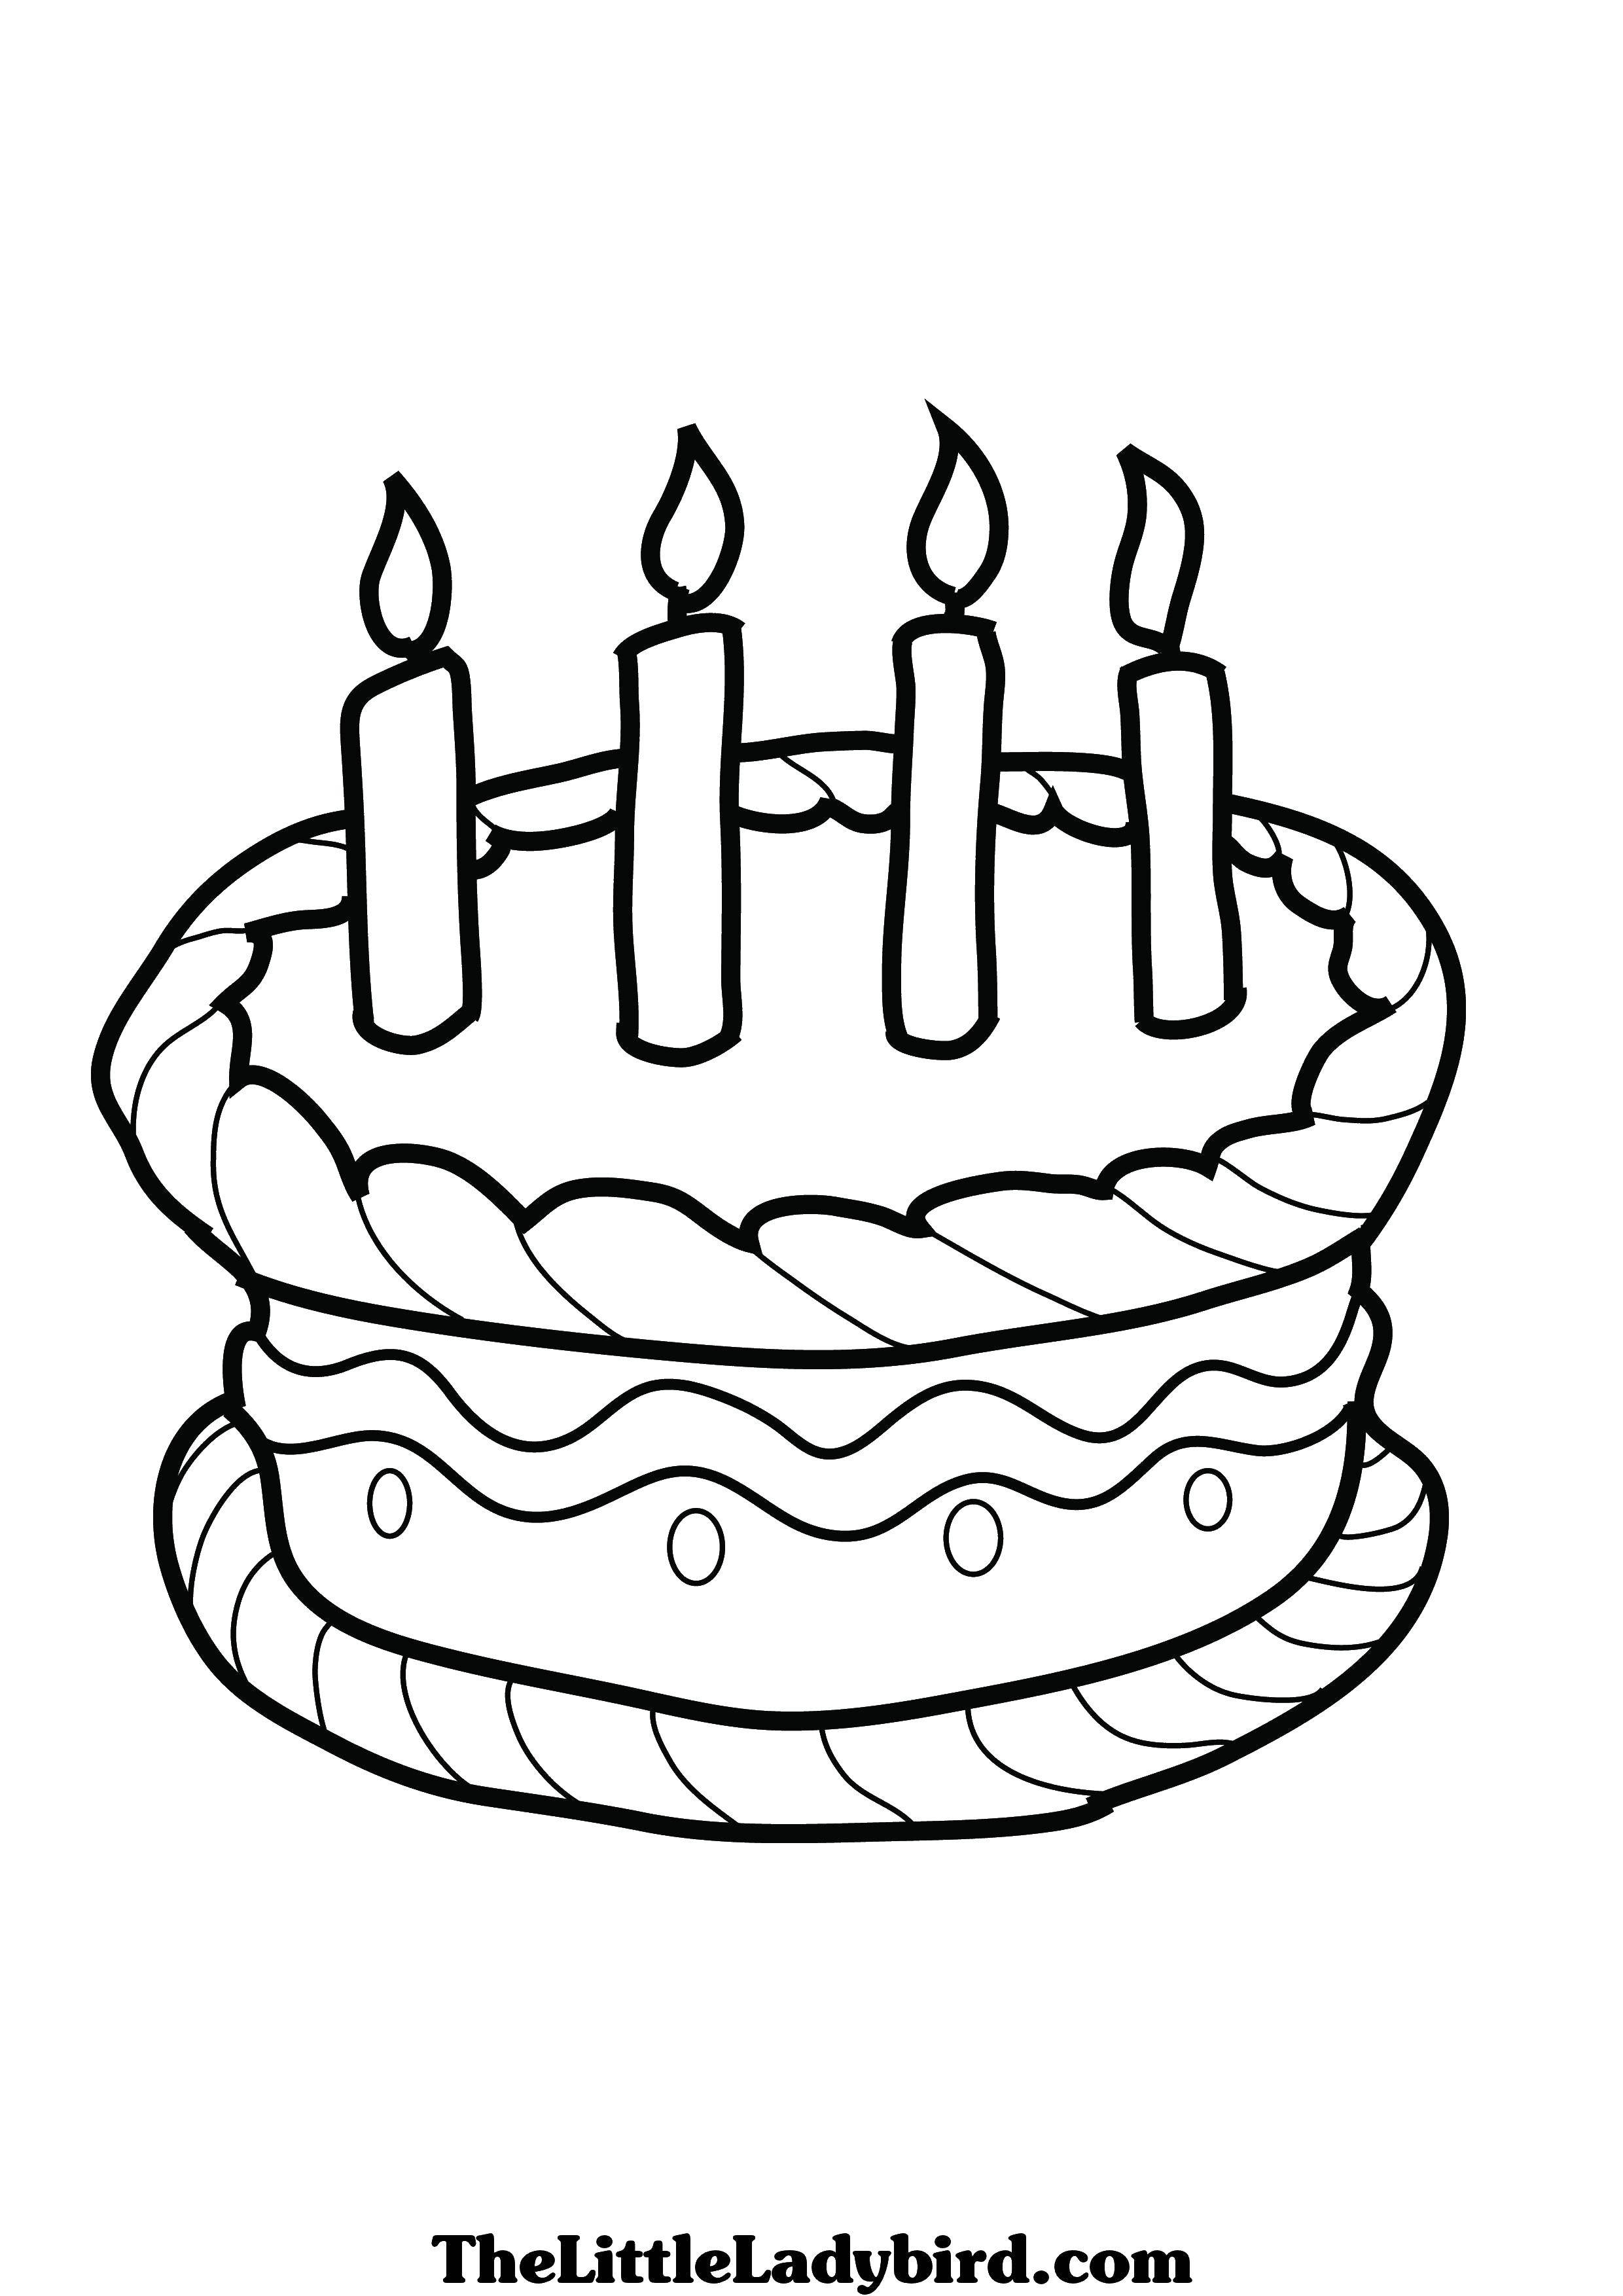 Coloring Four candles and cake. Category cakes. Tags:  cake, candles, plate.